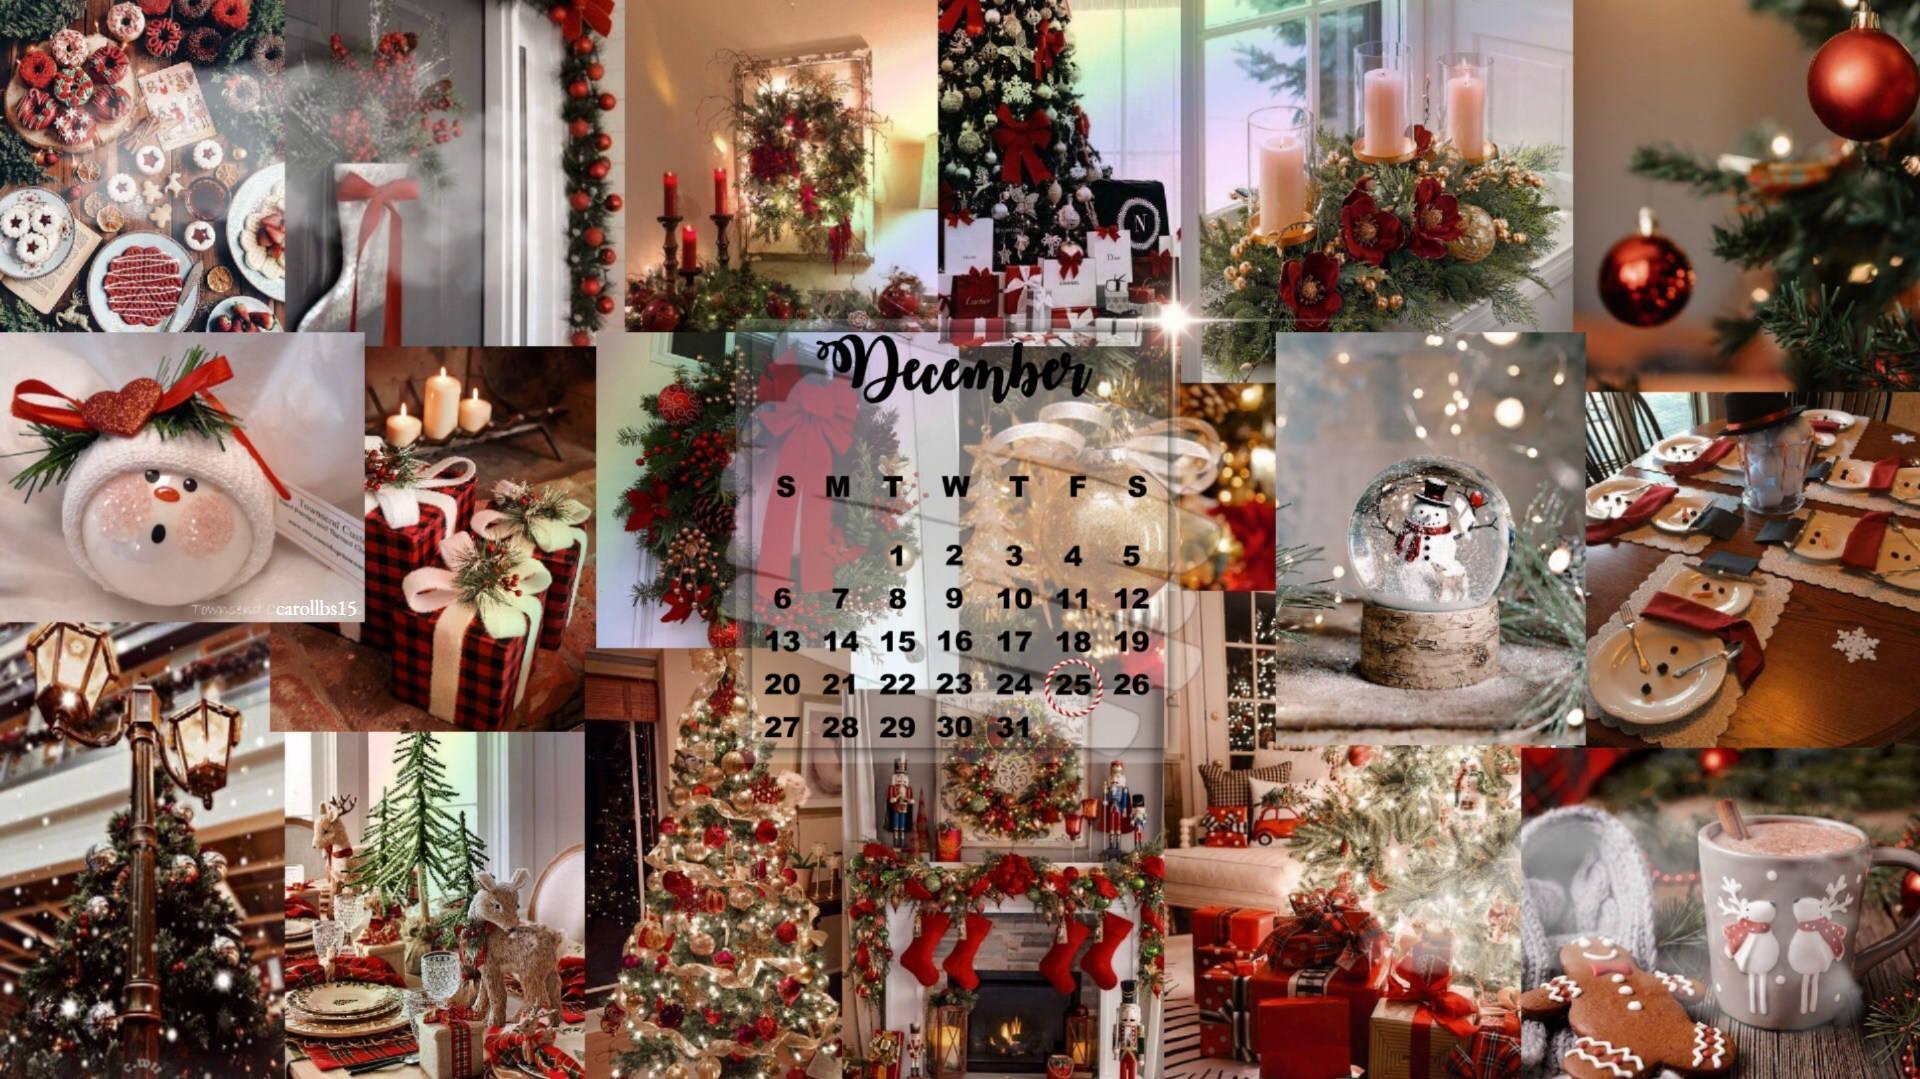 Christmas Collage With Calendar Wallpaper